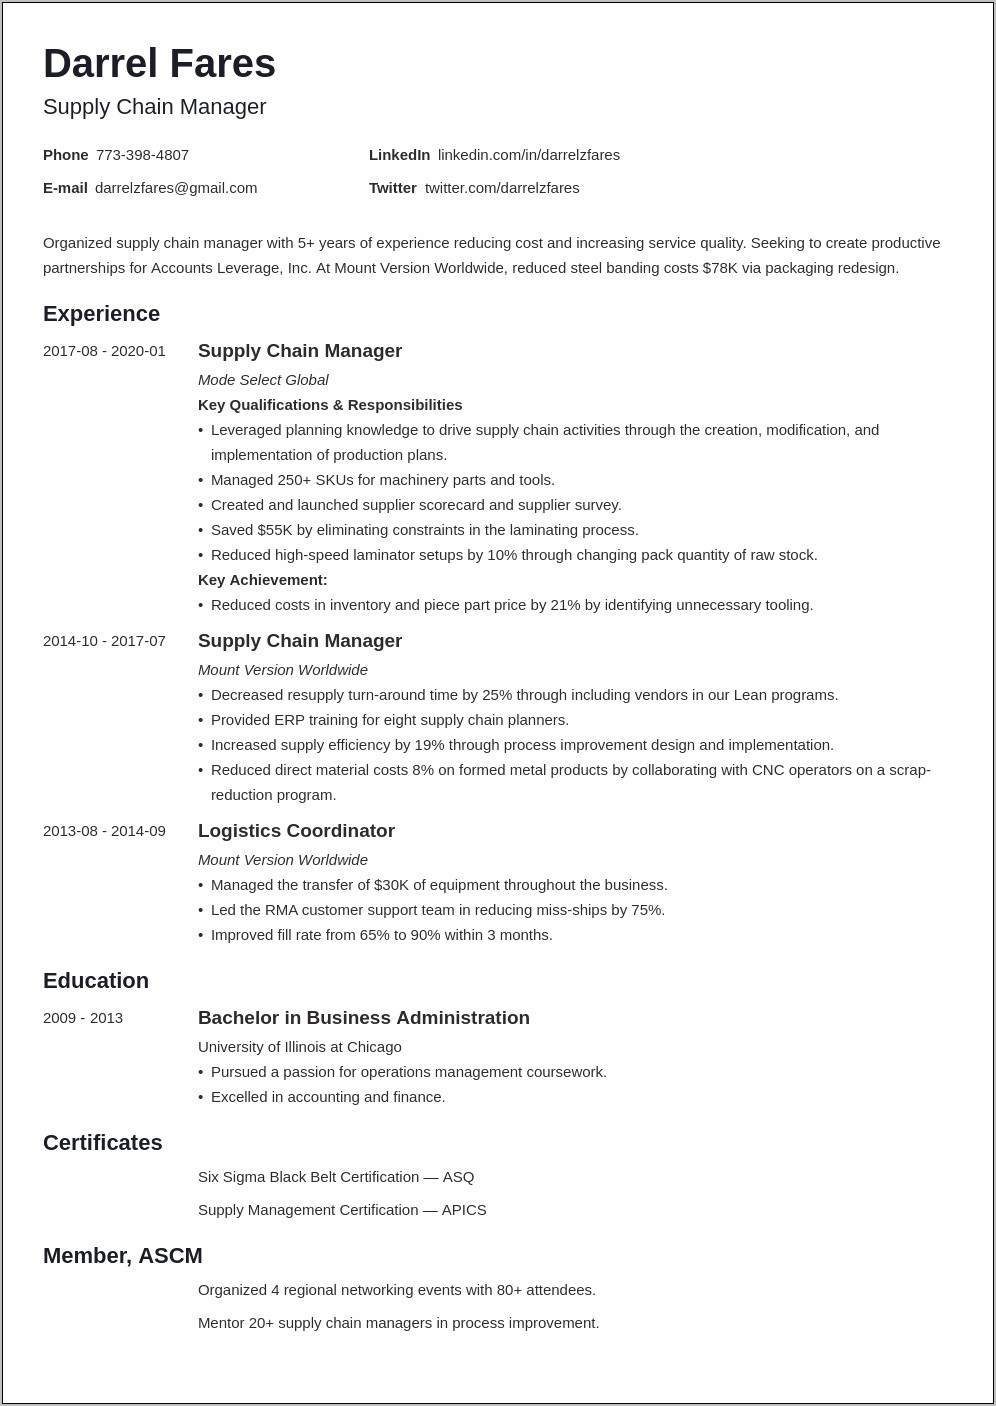 Resume Career Objective For Logistics Manager